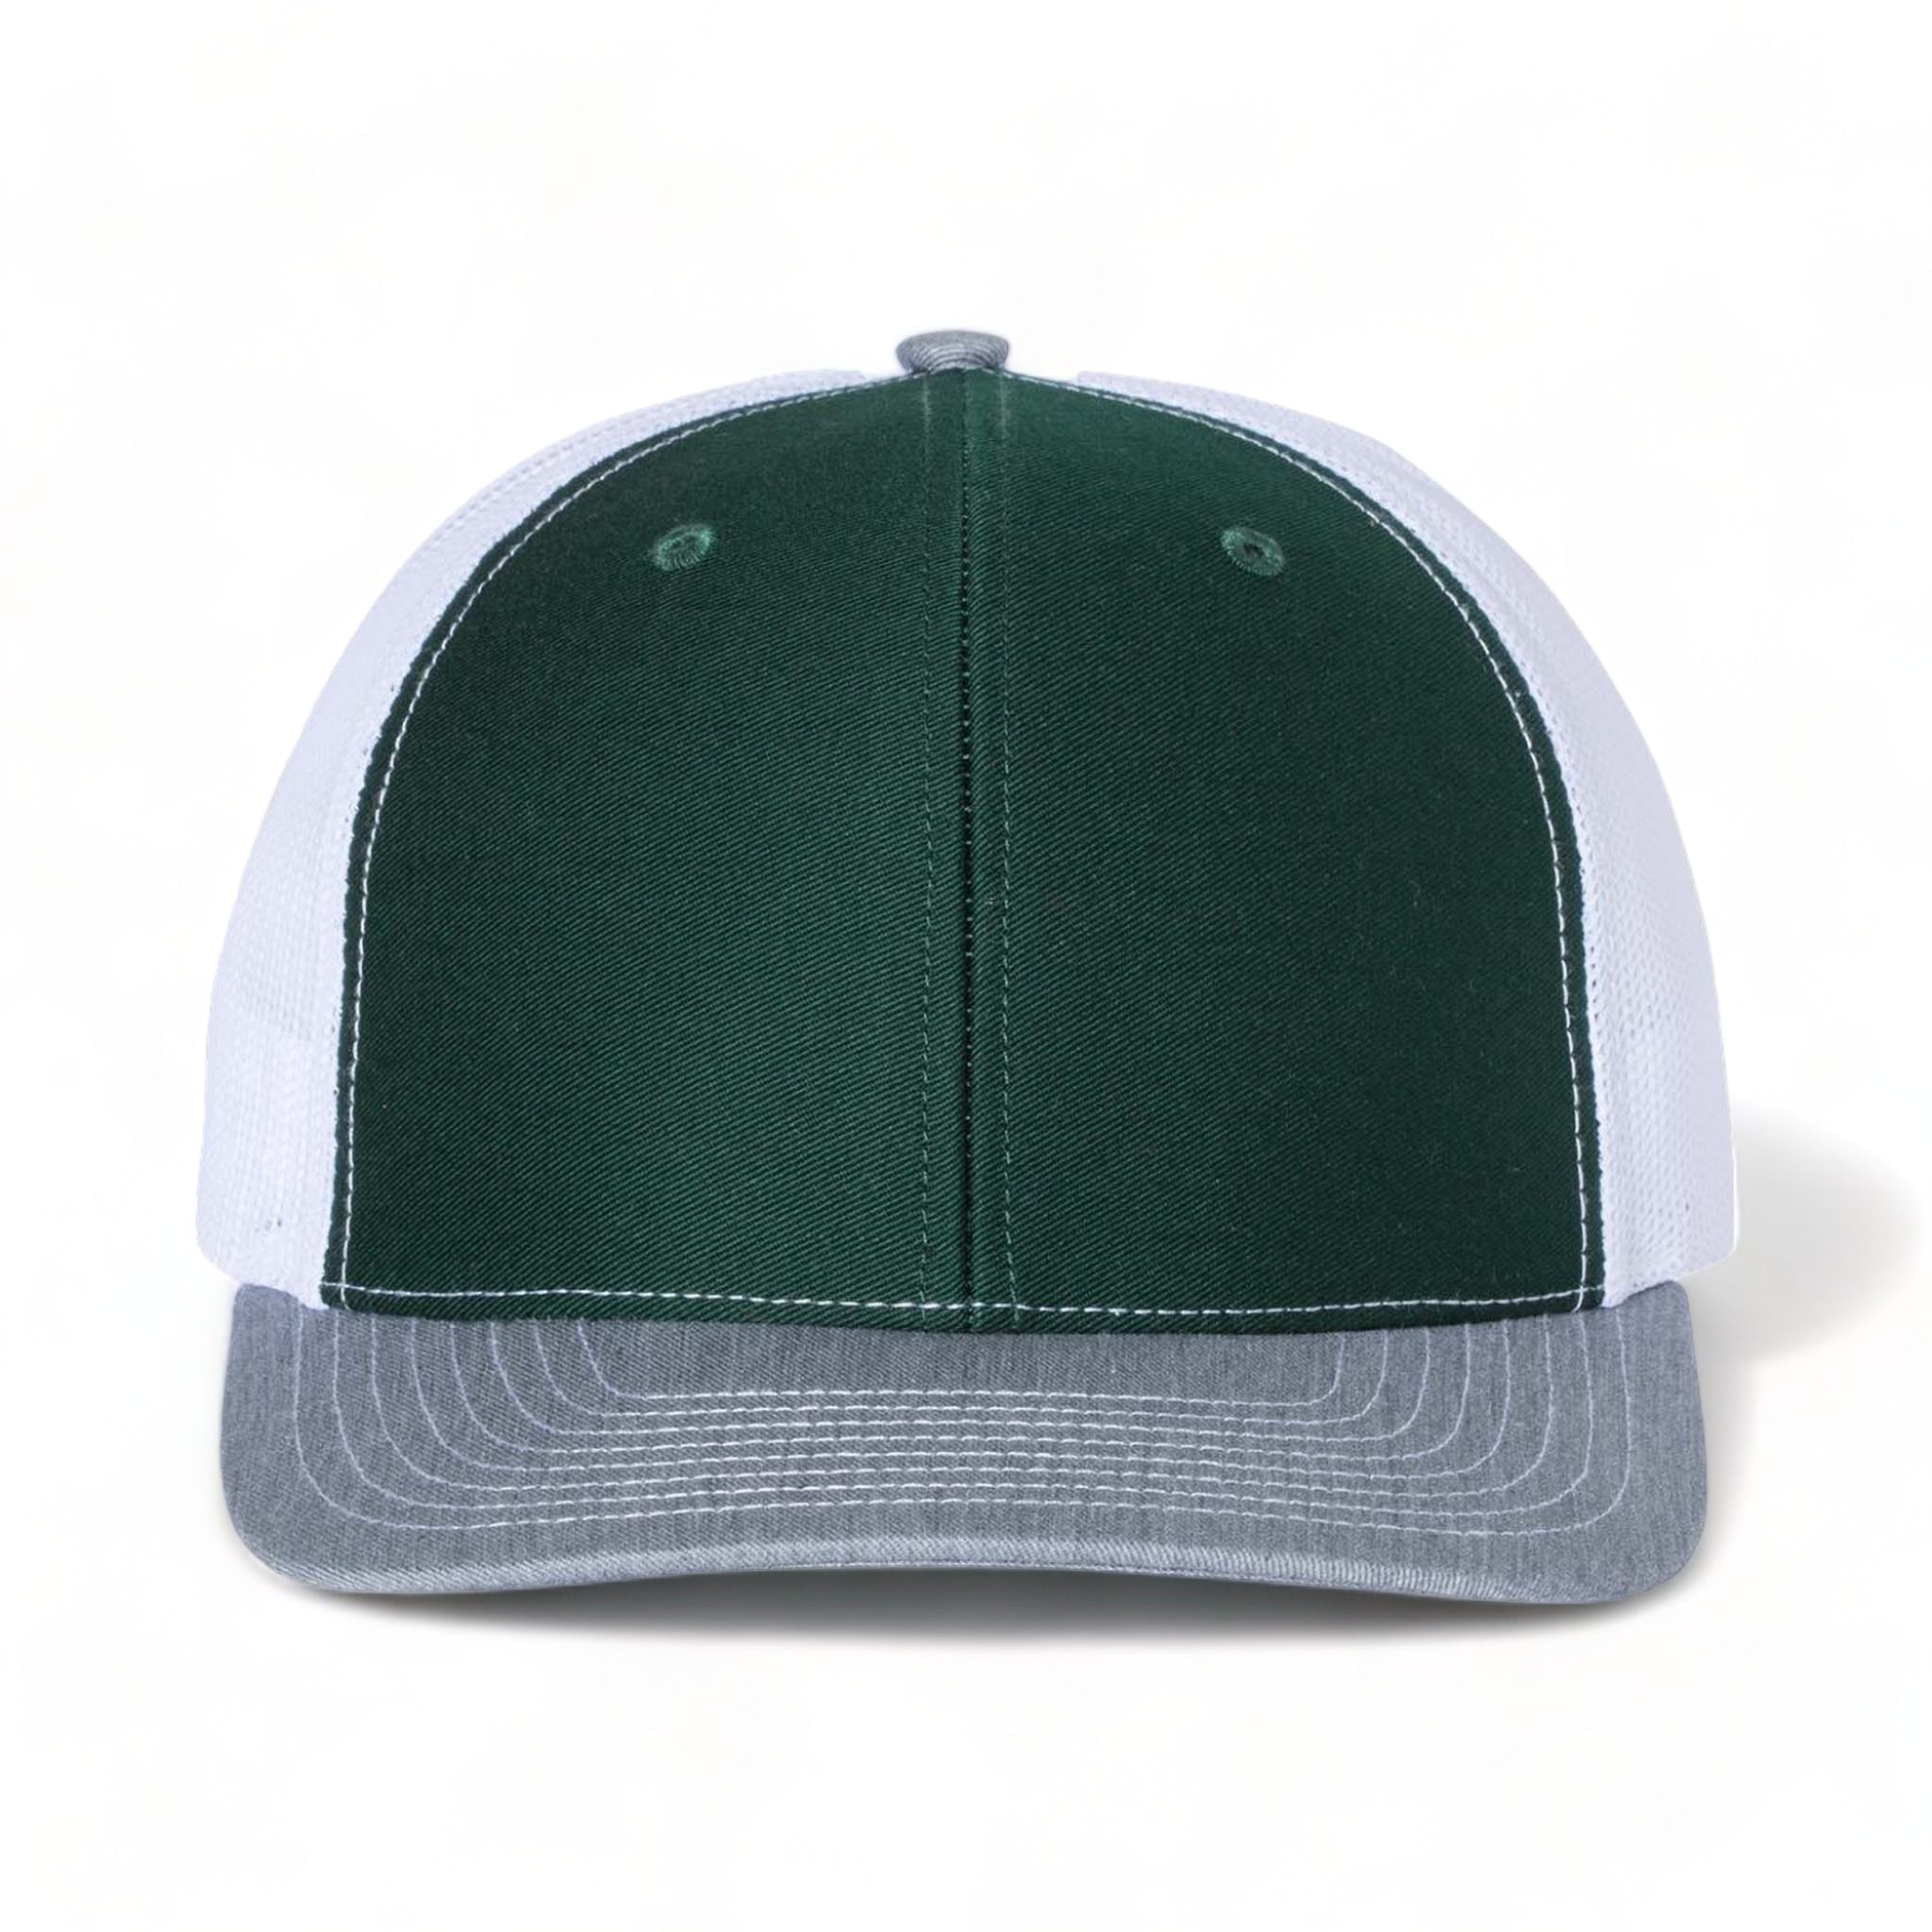 Front view of Richardson 112 custom hat in dark green, white and heather grey